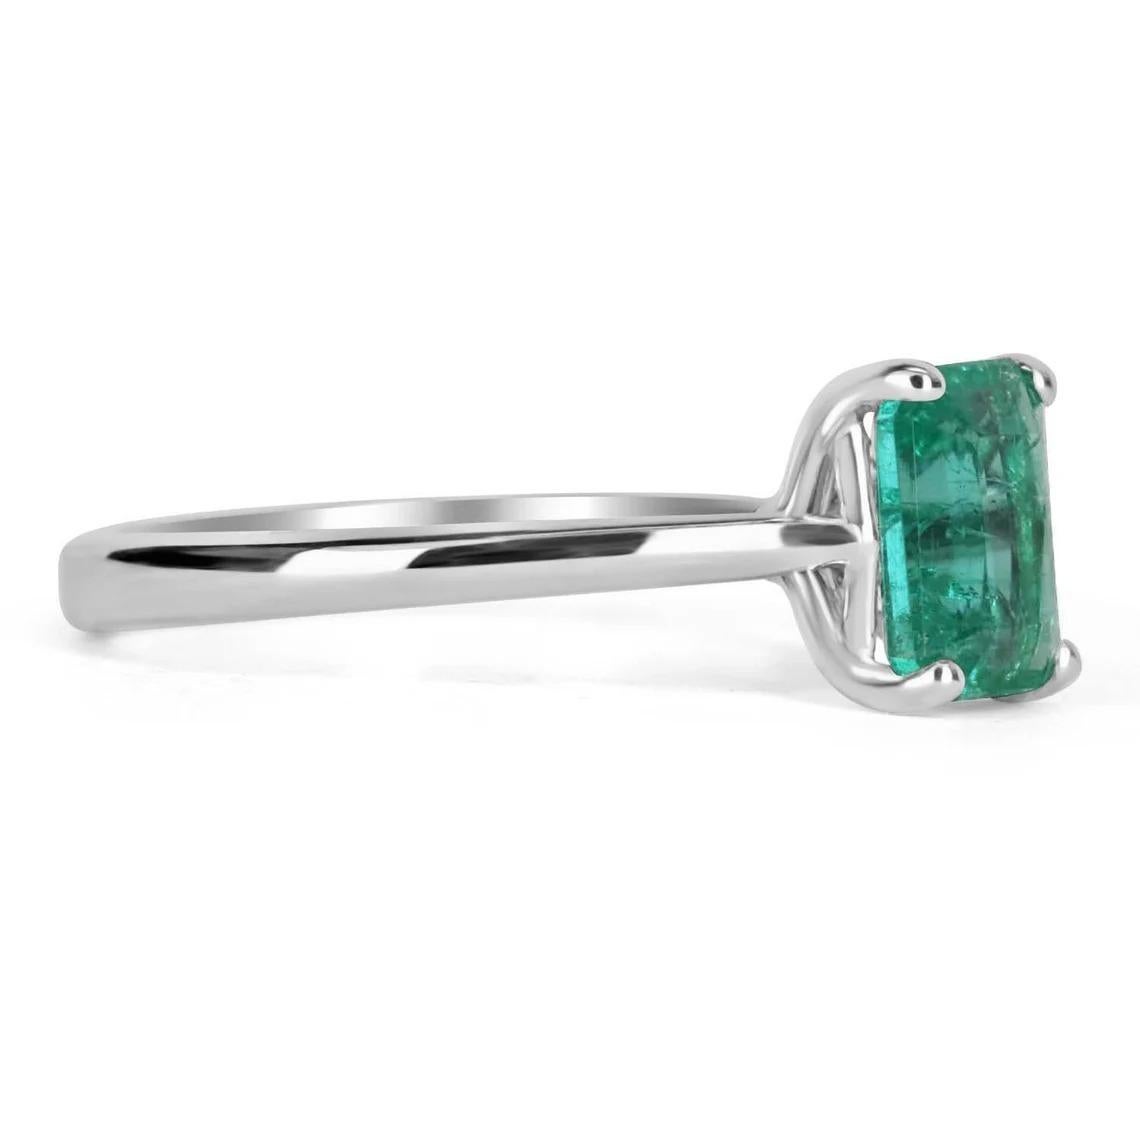 Displayed is a classic solitaire engagement ring in white gold. This gorgeous solitaire ring carries a full x-carat emerald-emerald cut in a four-prong setting. Fully faceted, this gemstone showcases excellent shine. The gem has a stunning